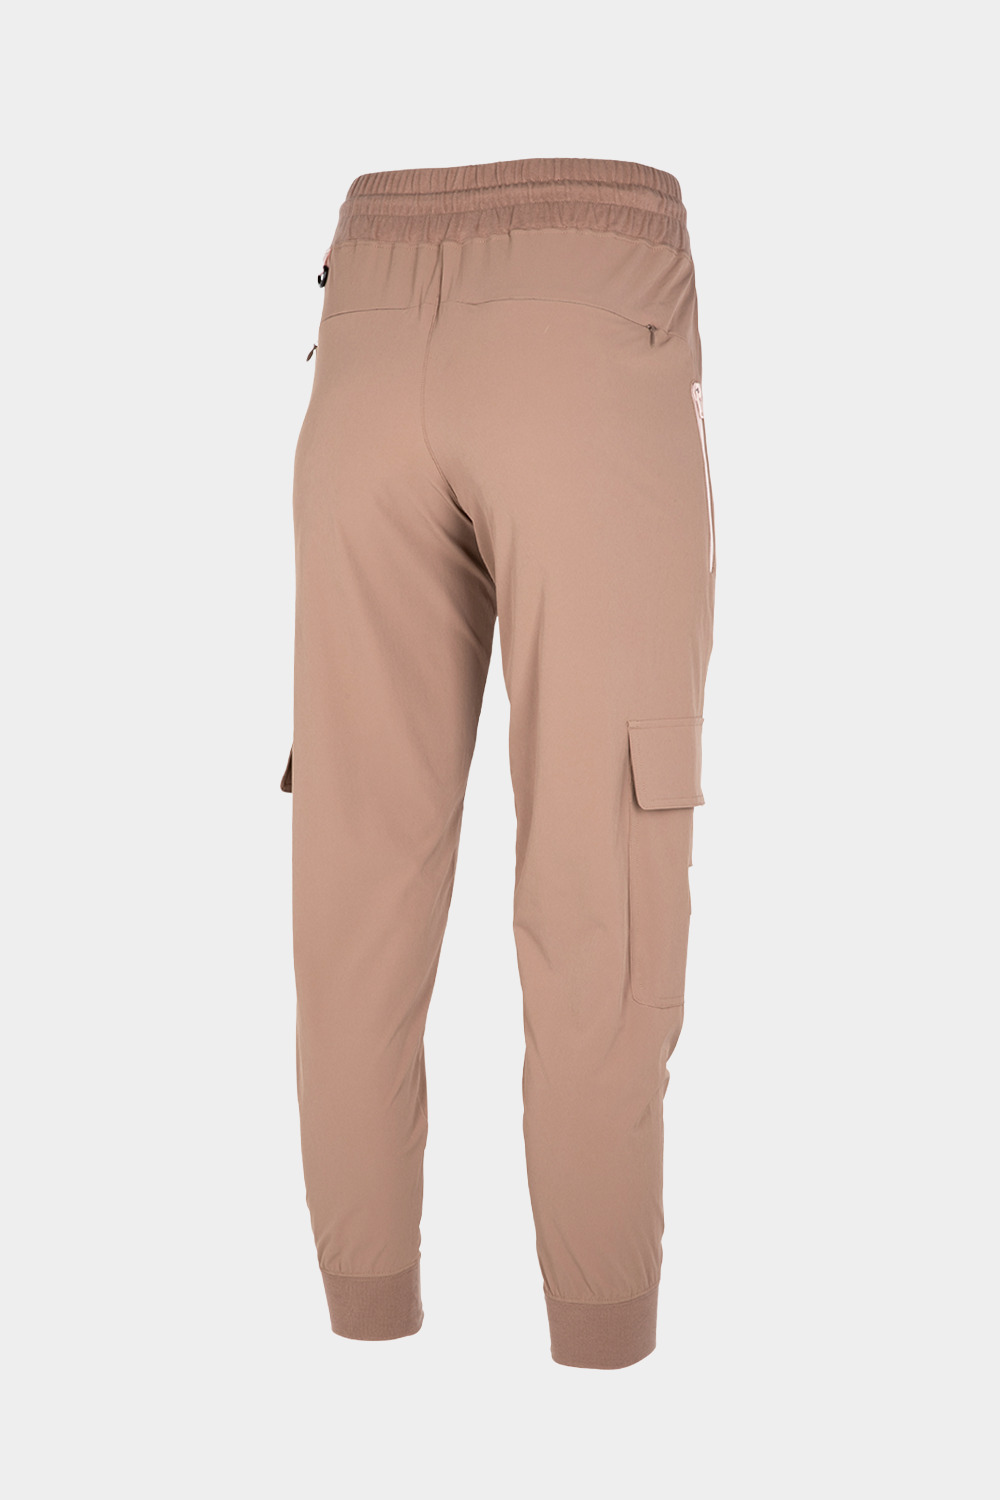 back view of brown lightweight women's climbing pants with cargo pockets and elastic waistband on female mannequin